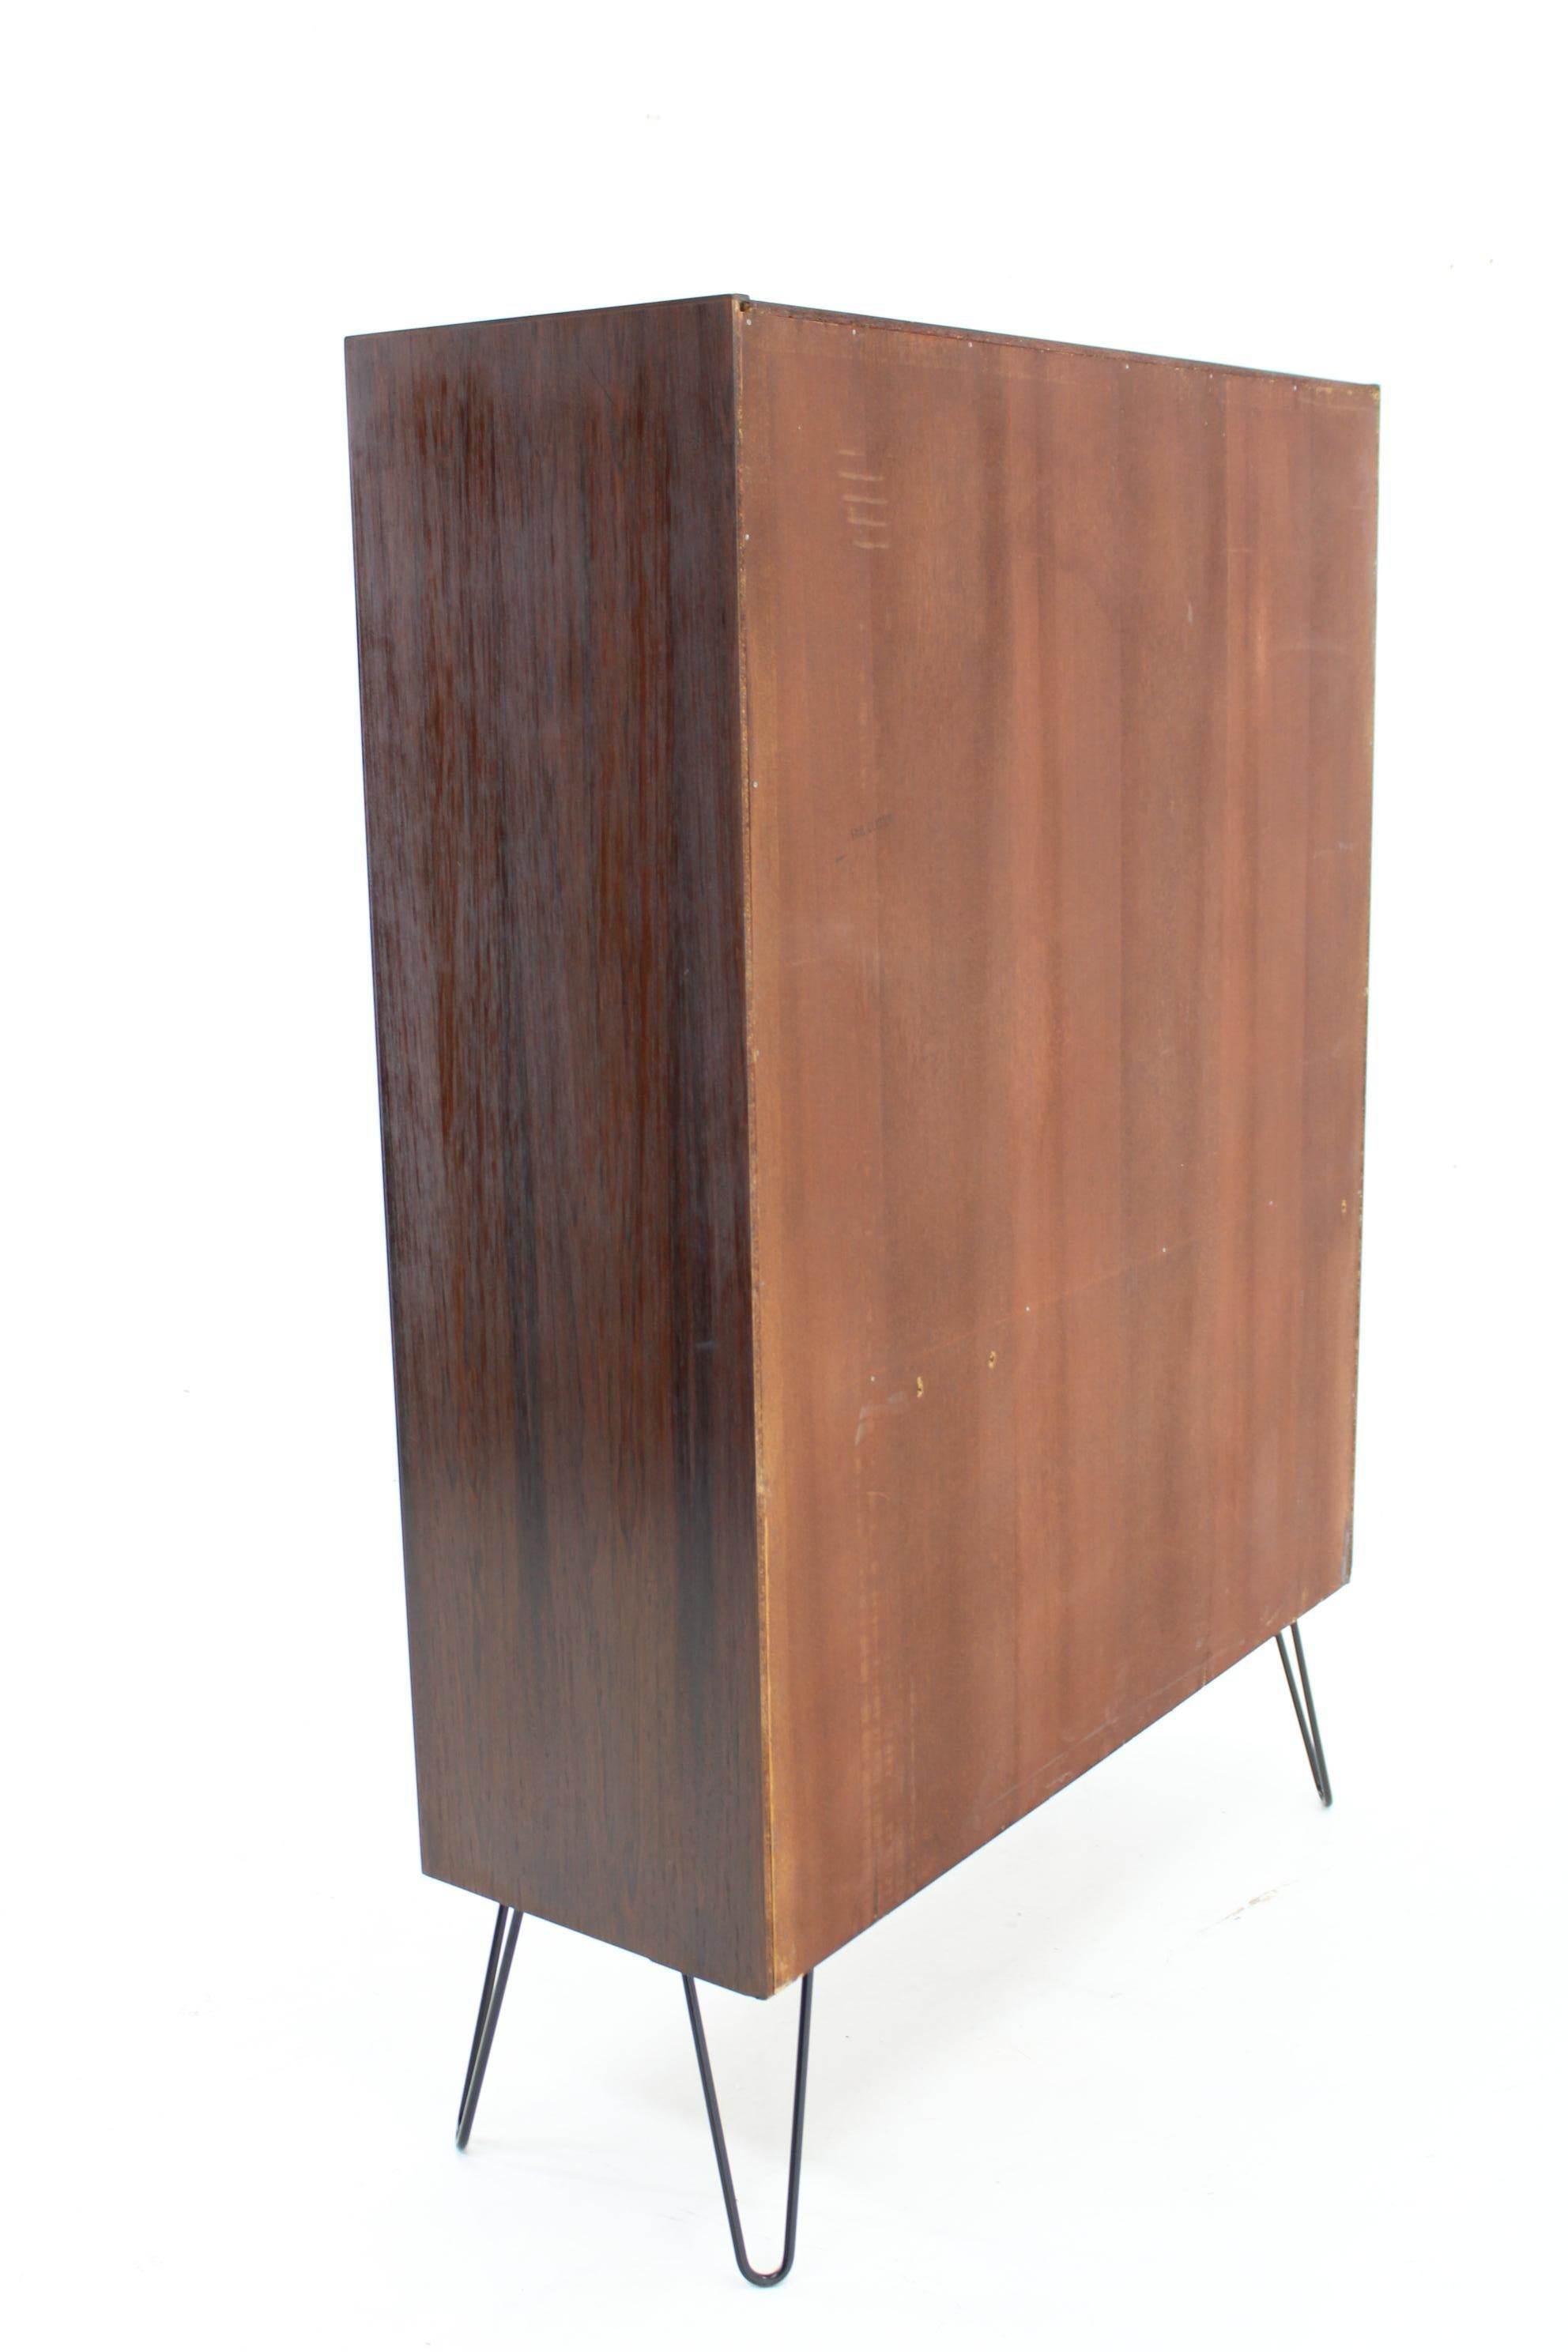 1960s Upcycled Palisander Cabinet, Denmark In Good Condition For Sale In Praha, CZ